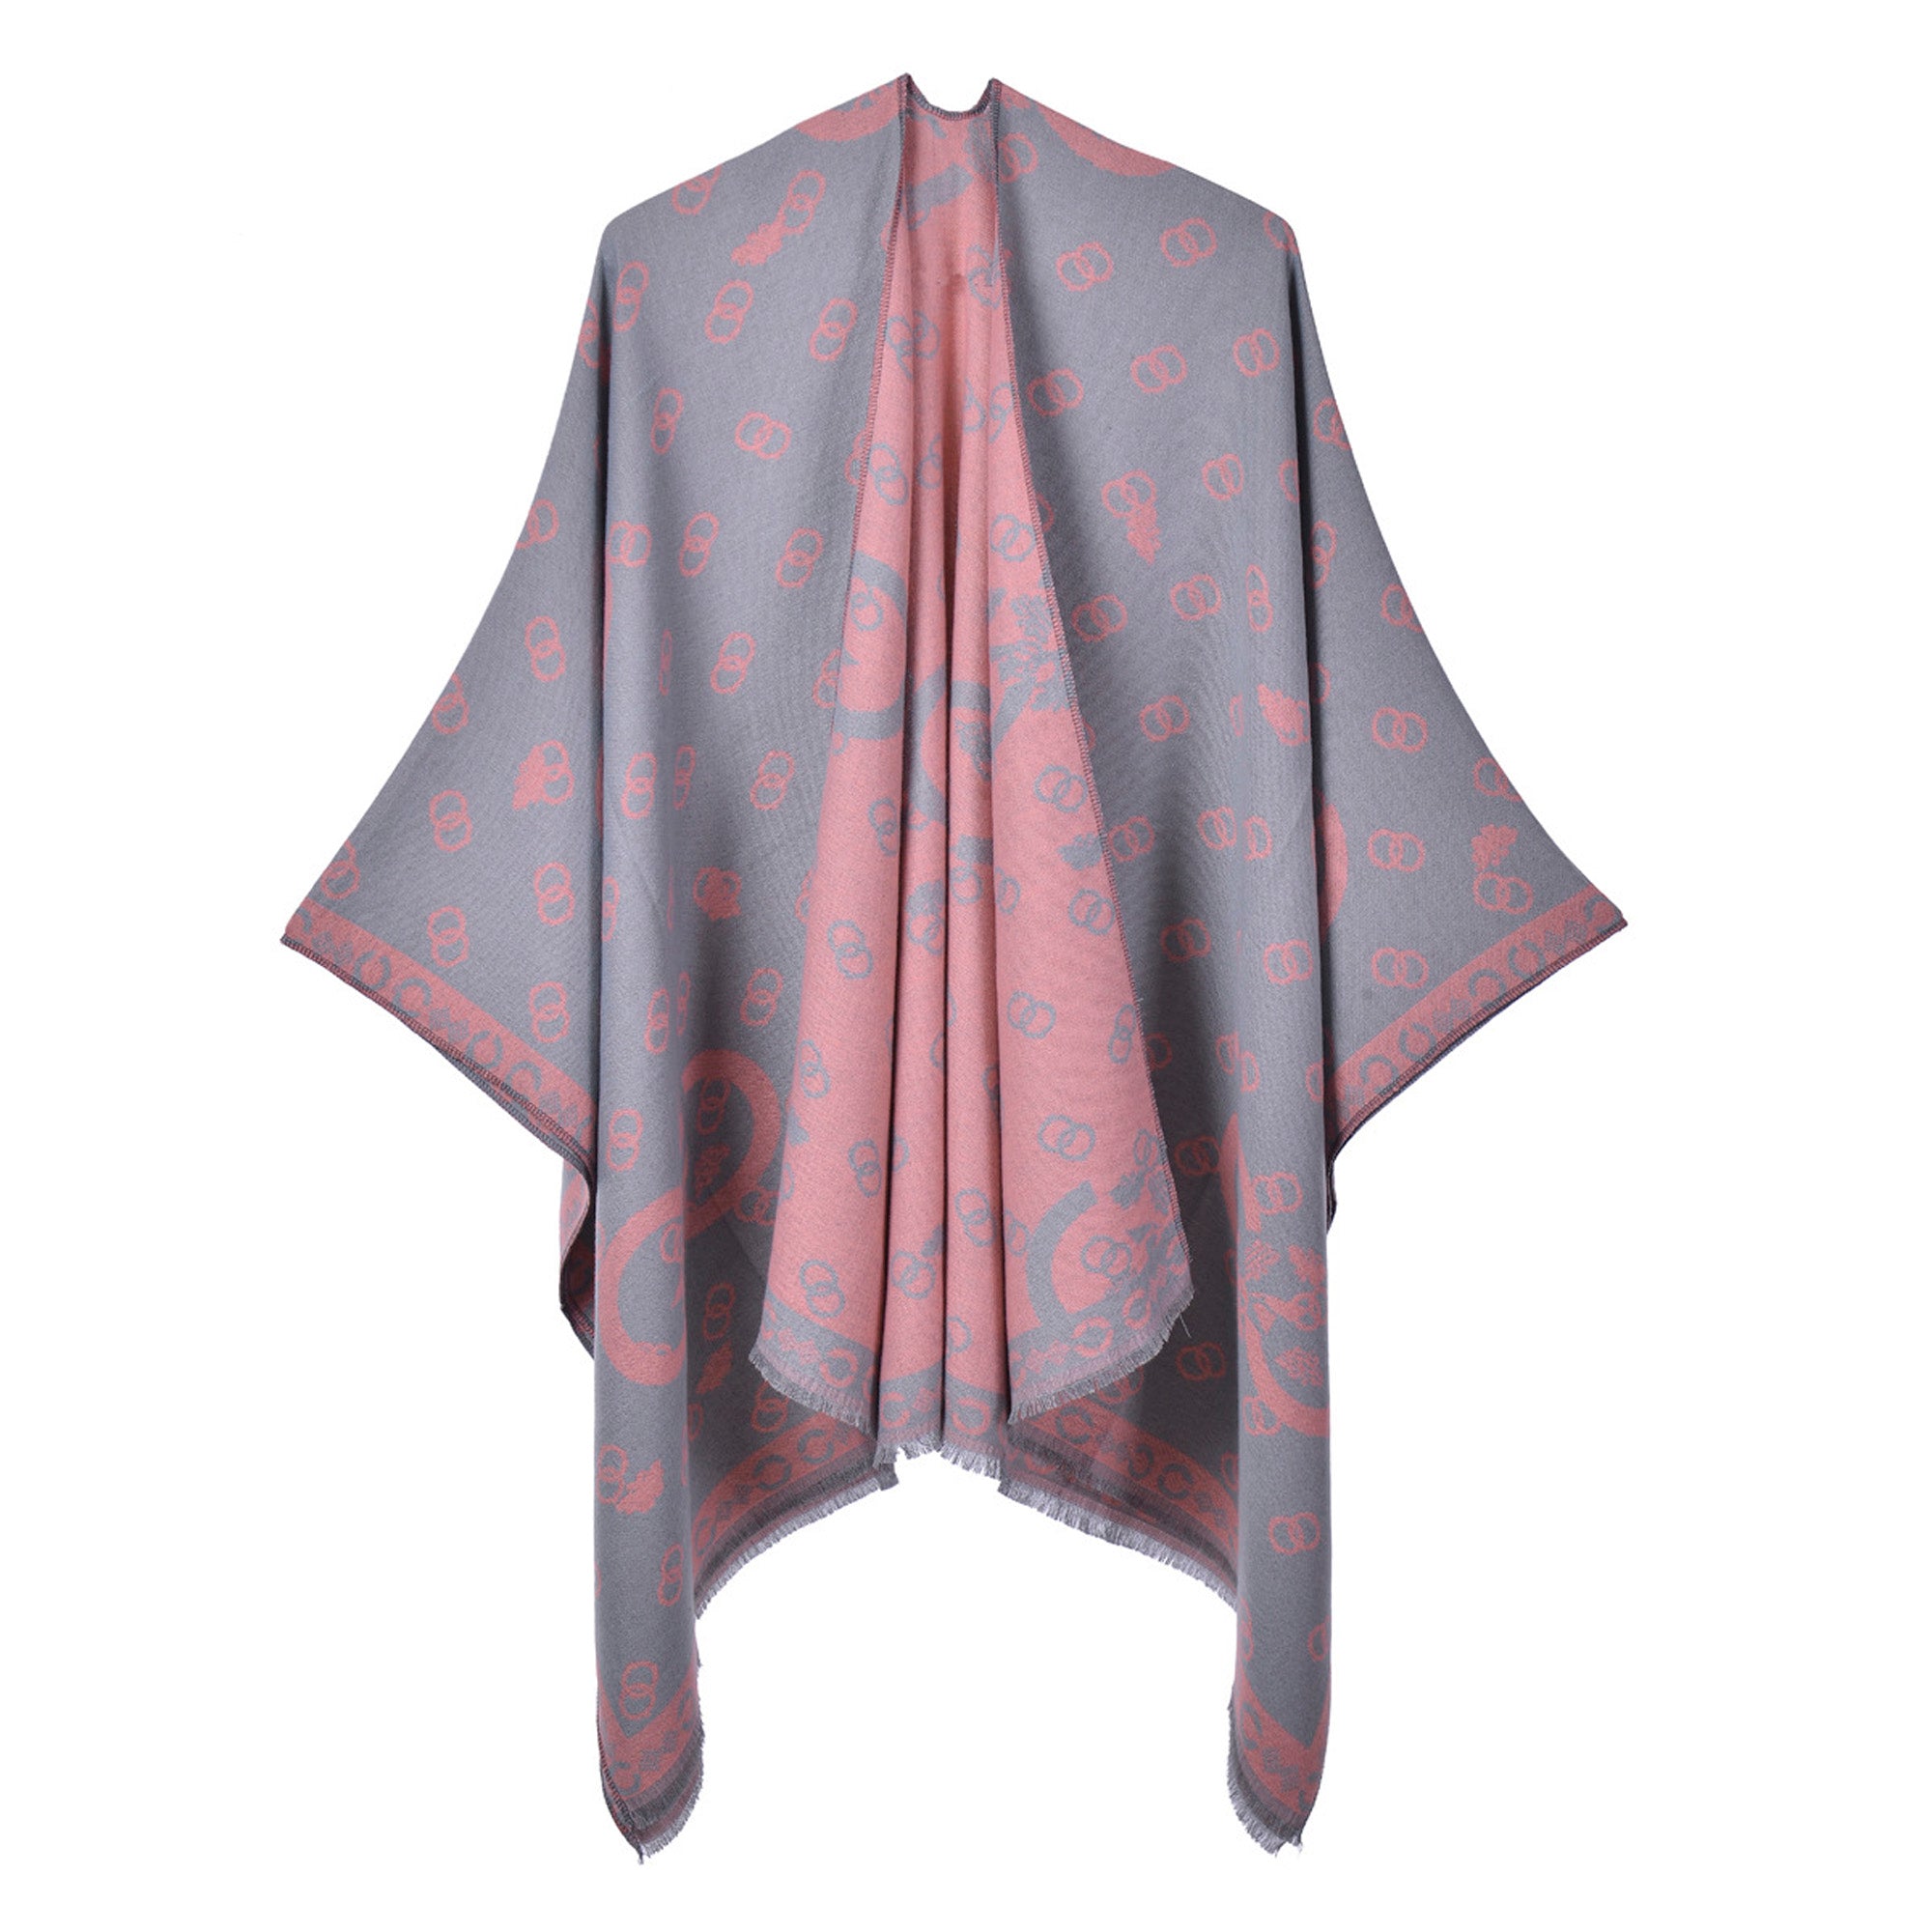 Tasseled Double Sided Double C Gray Pink